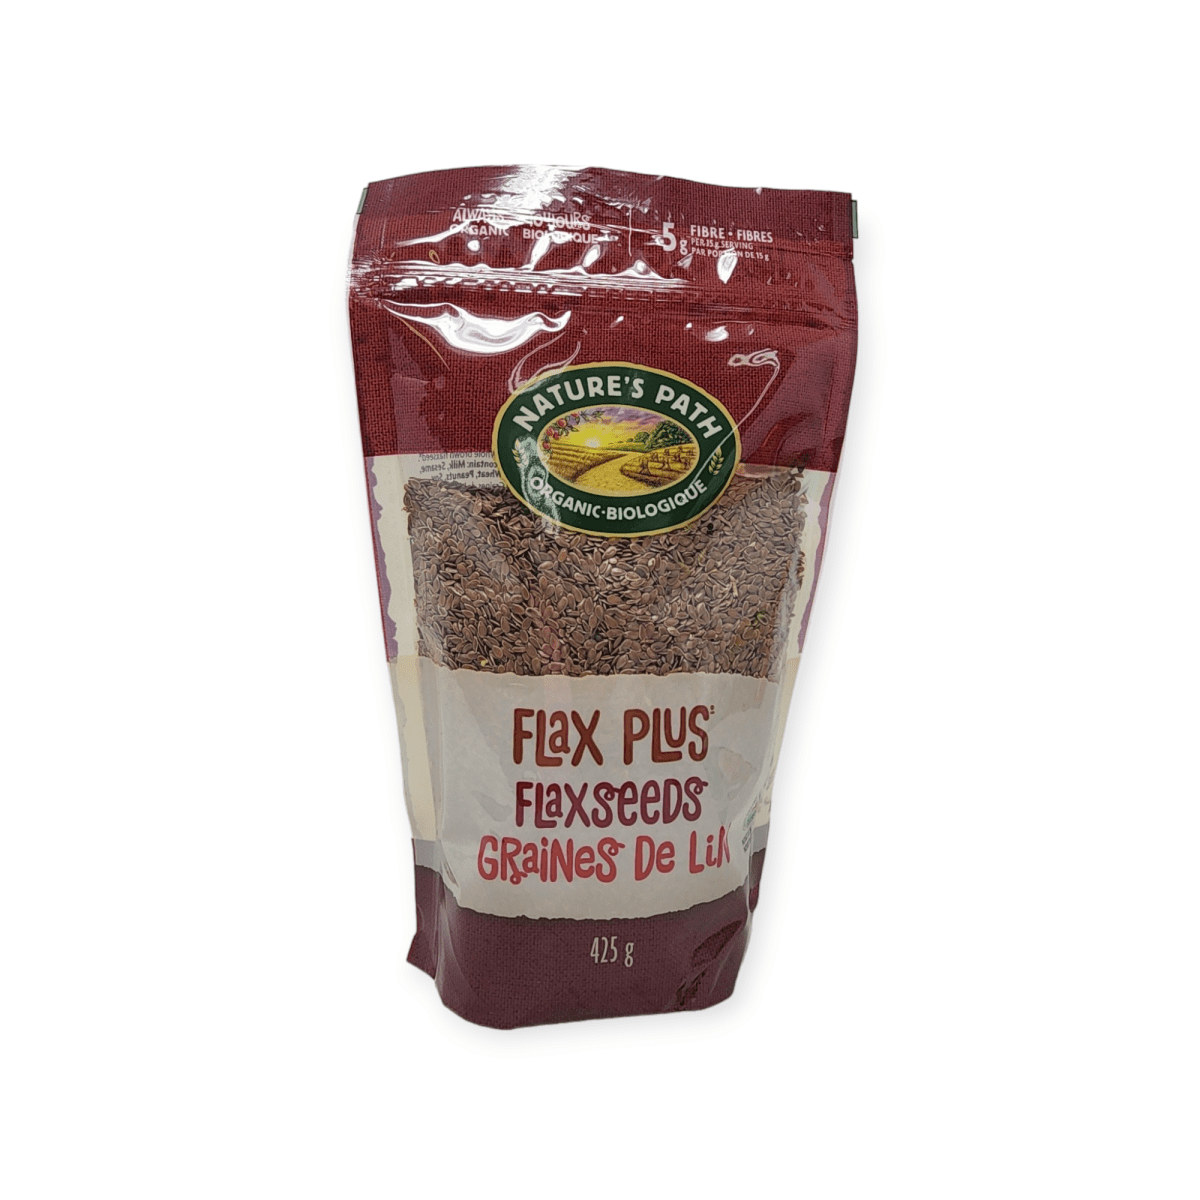 Nature’s Path Flax Plus Flax Seeds (425g)